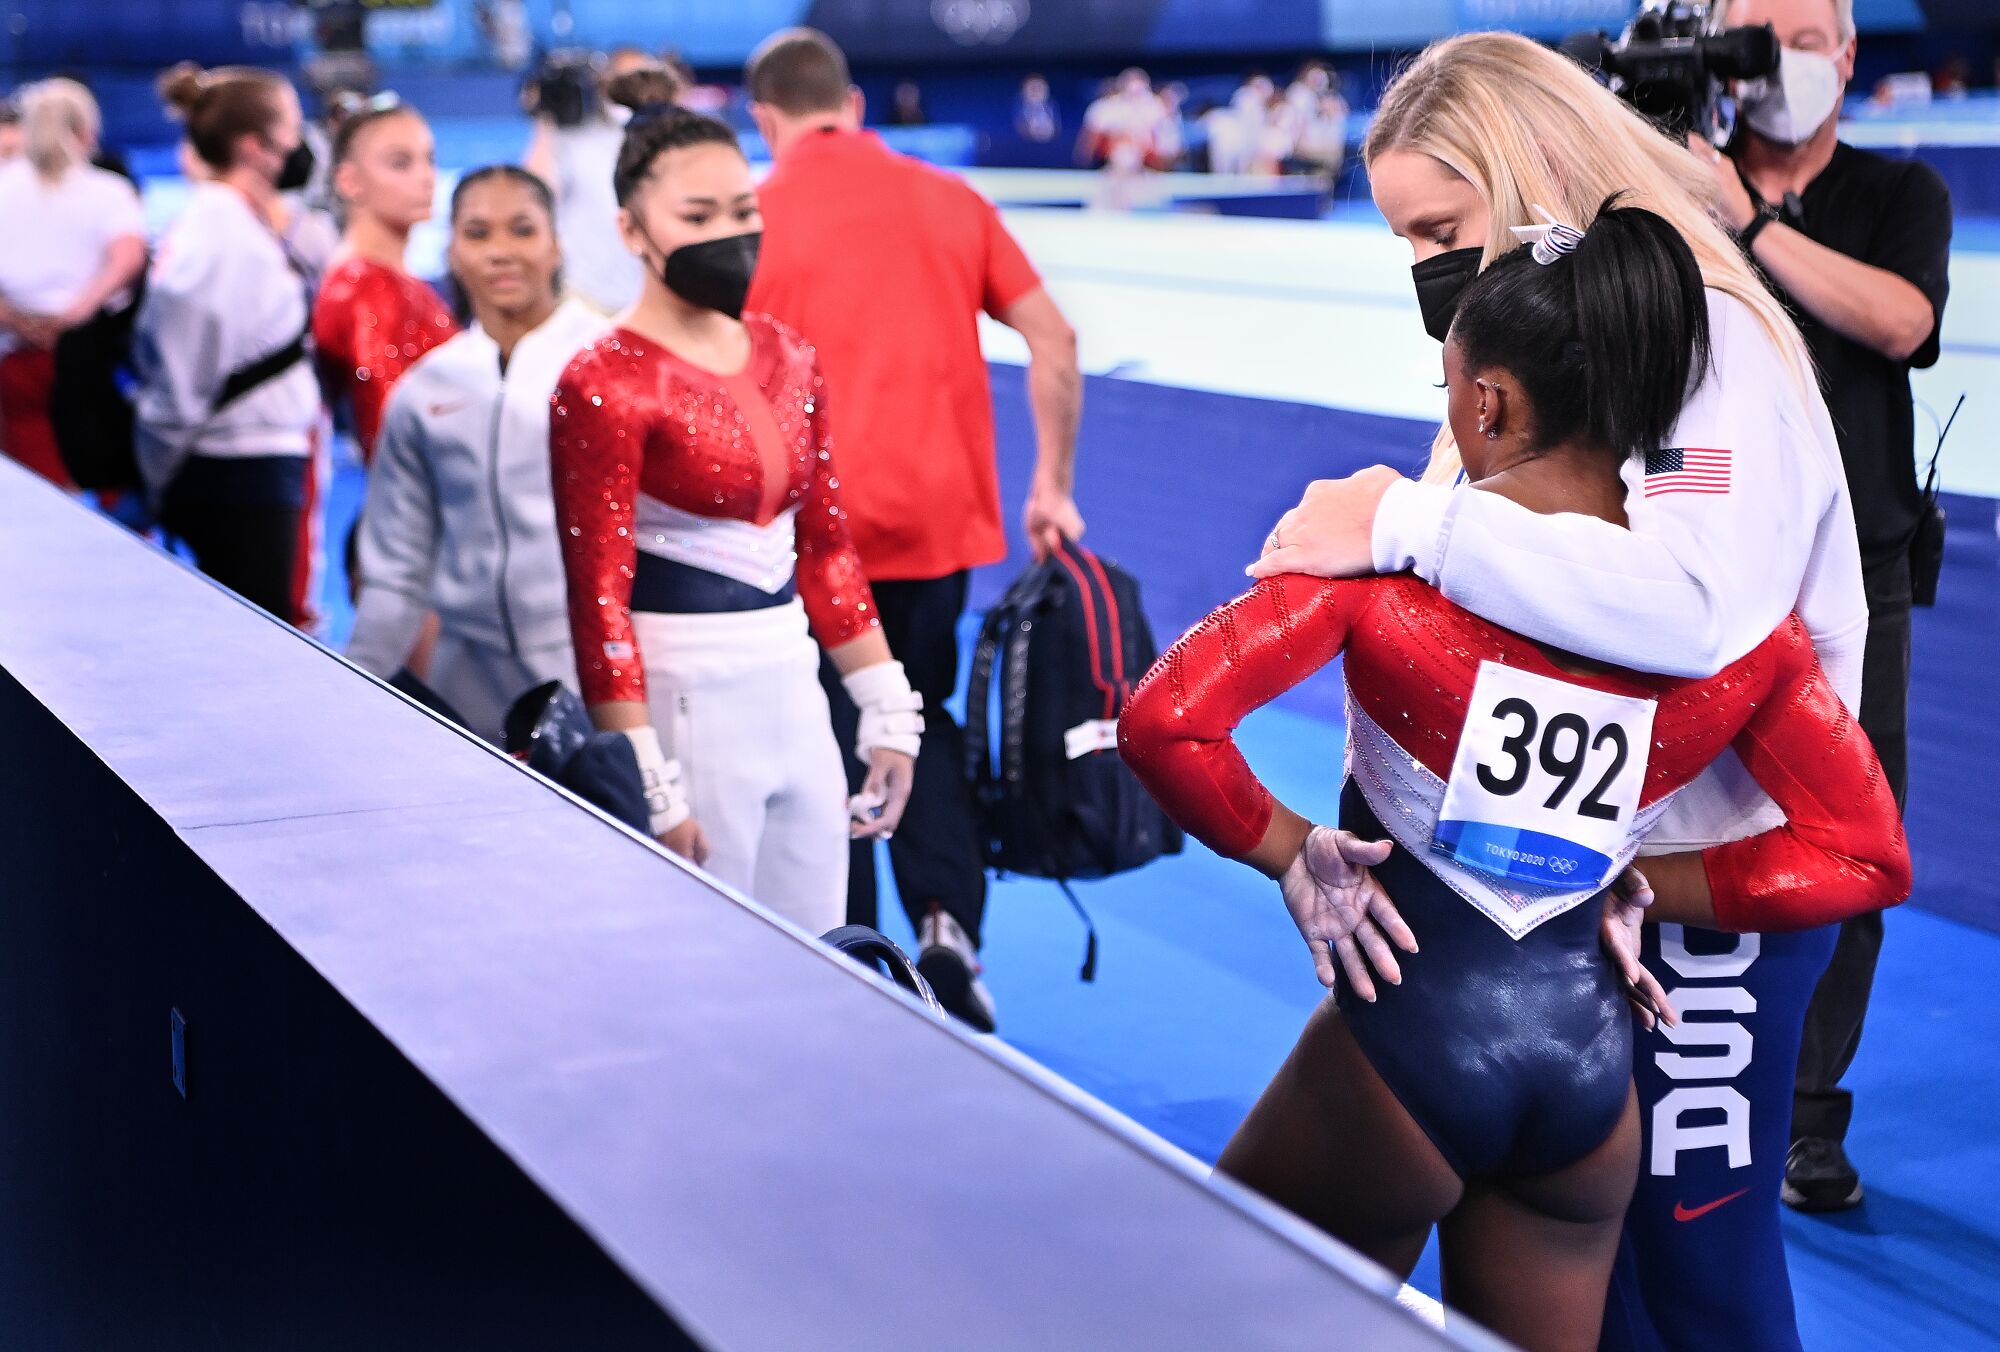 July 26: USA's Simone Biles is consoled by a woman after competing at the Olympics